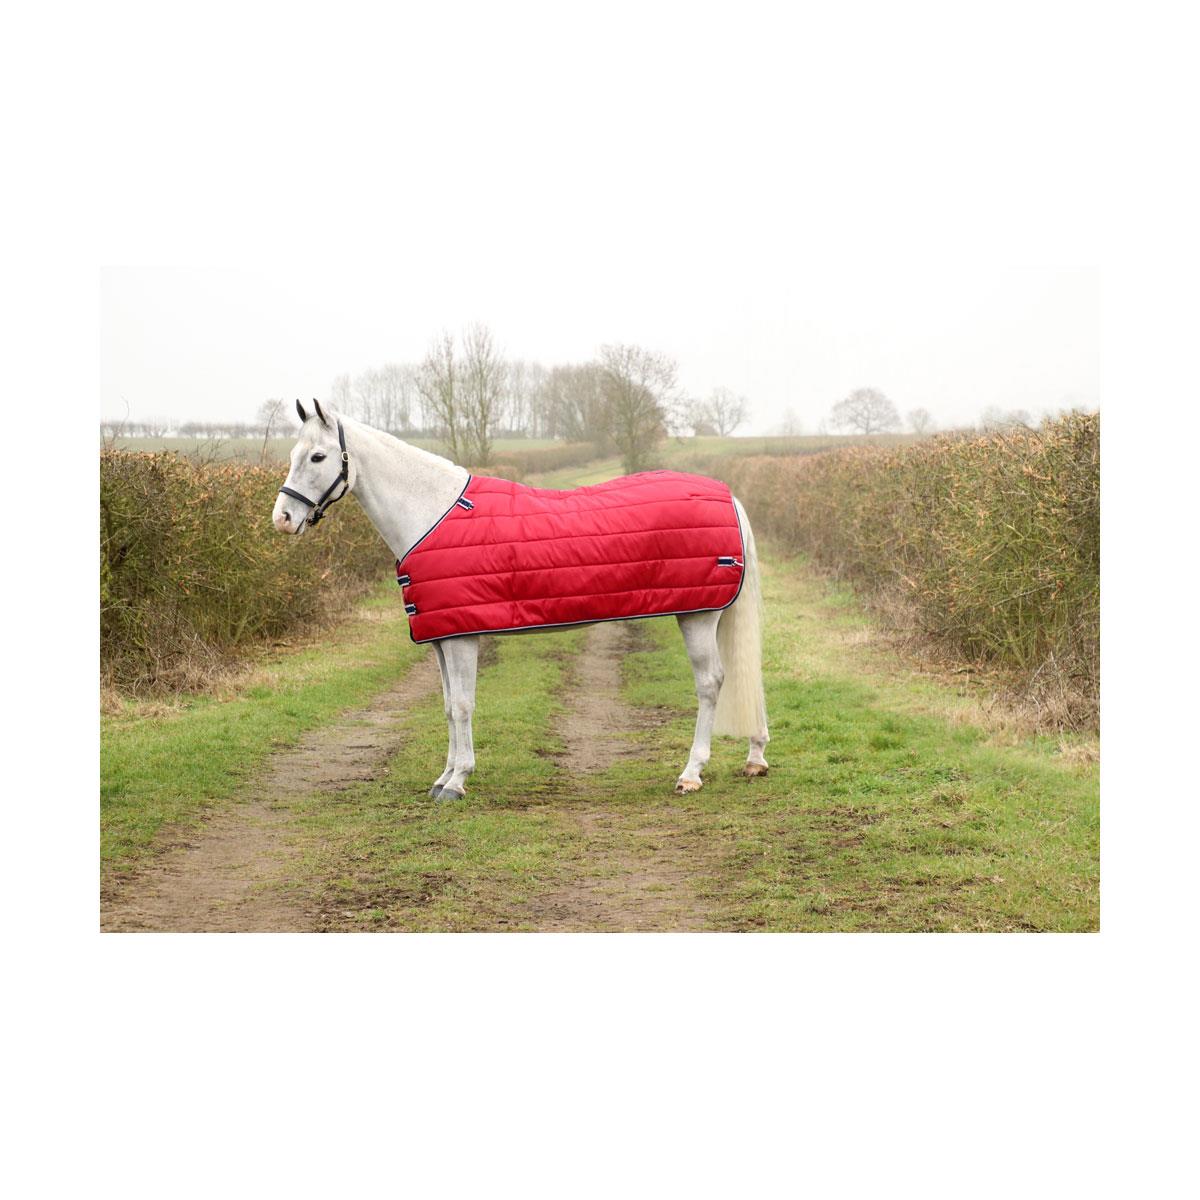 DefenceX System 400 Turnout Rug 2 in 1 - Just Horse Riders